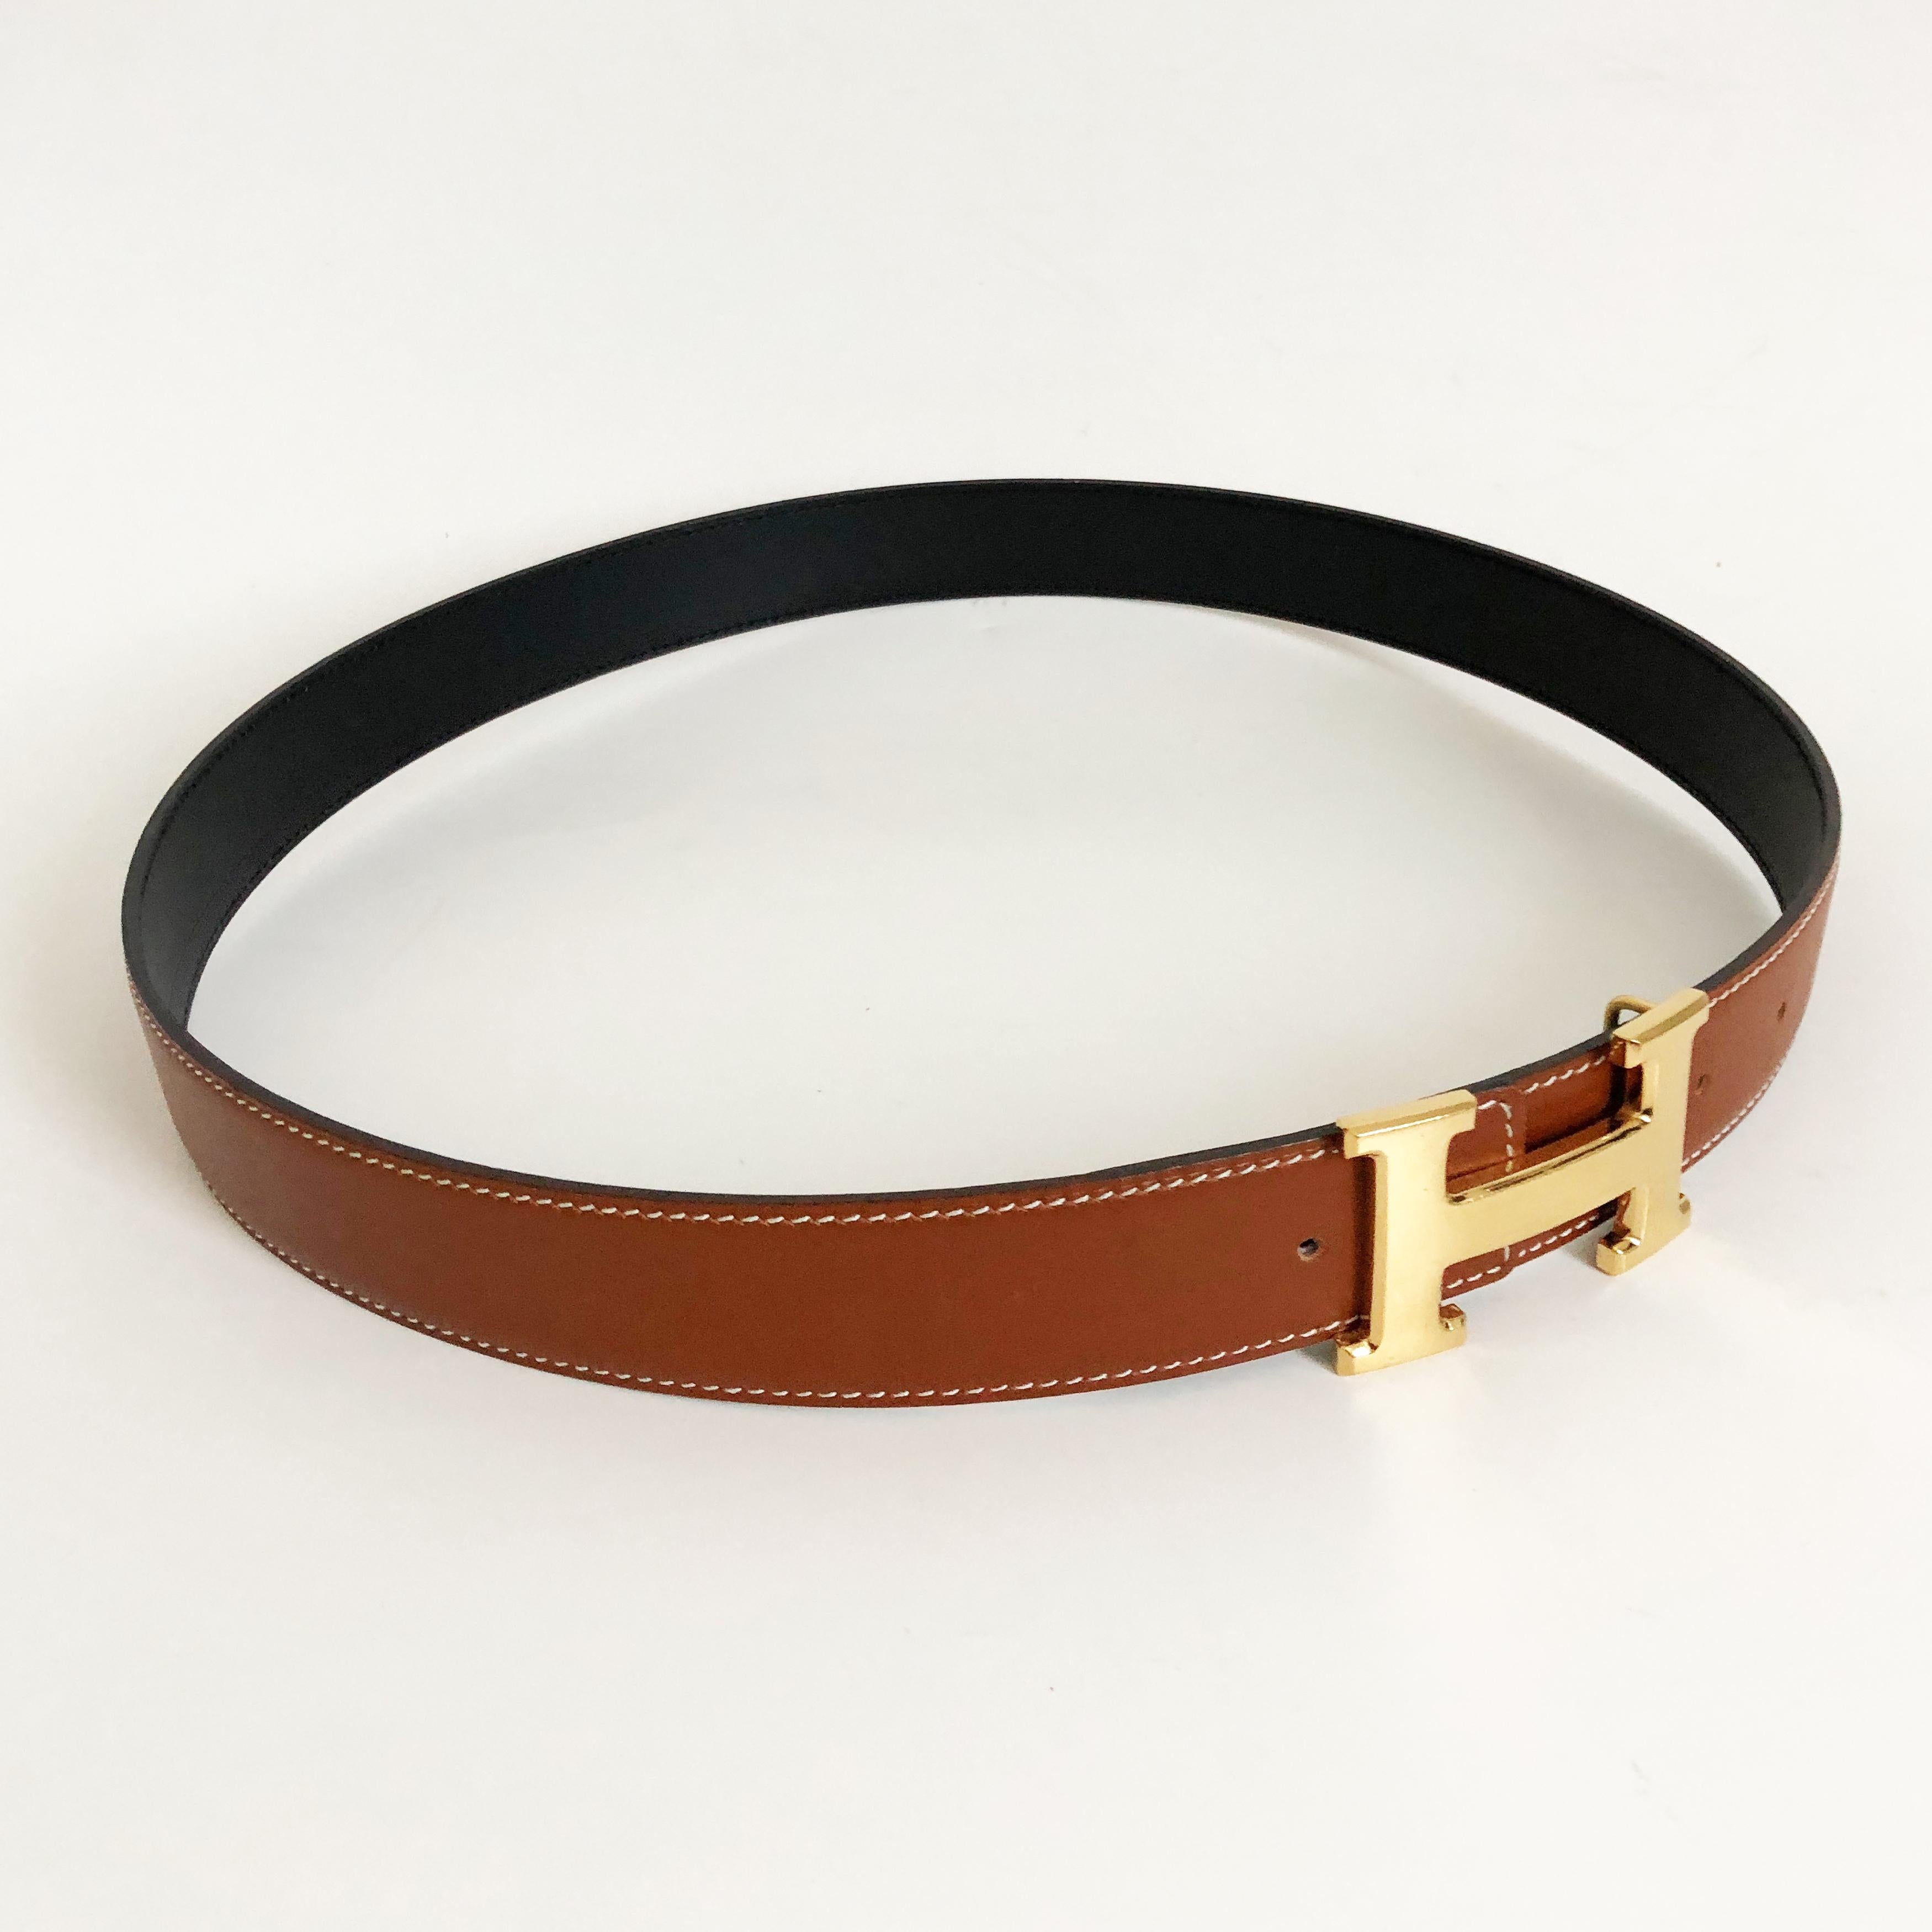 Hermes Constance Gold Buckle & Reversible Belt Strap, size 75cm (29.9in). Strap reversible between noir (black) and saddle (natural). Stamped Q in a square (2013 year of production). Gold metal buckle is stamped HERMES. Preowned with signs of wear: